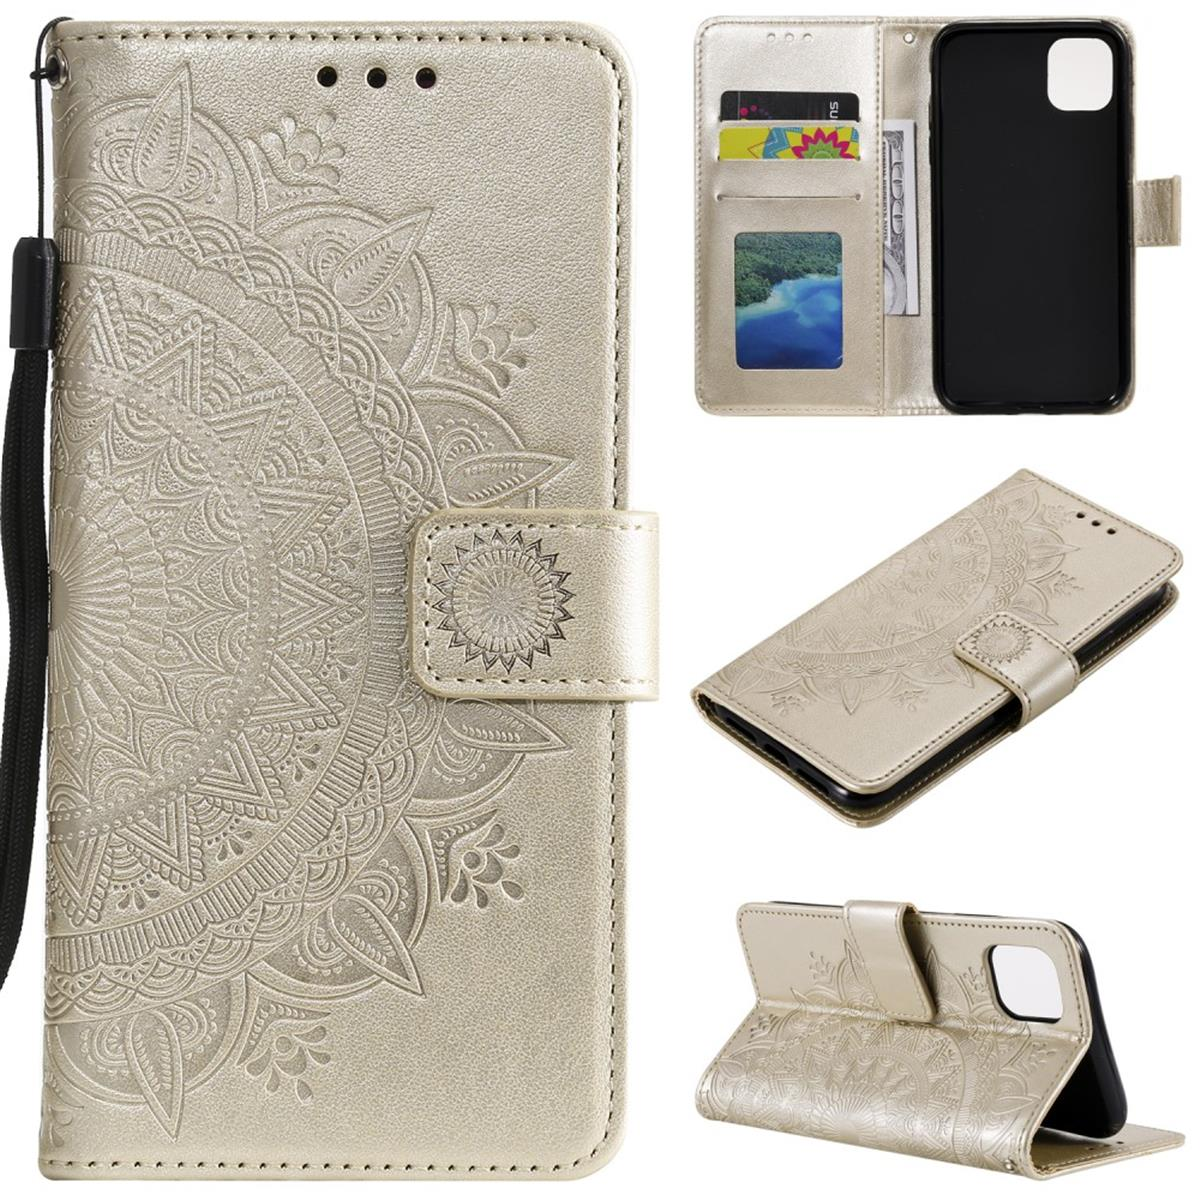 mit Bookcover, Gold Apple, Muster, COVERKINGZ iPhone 11, Mandala Klapphülle